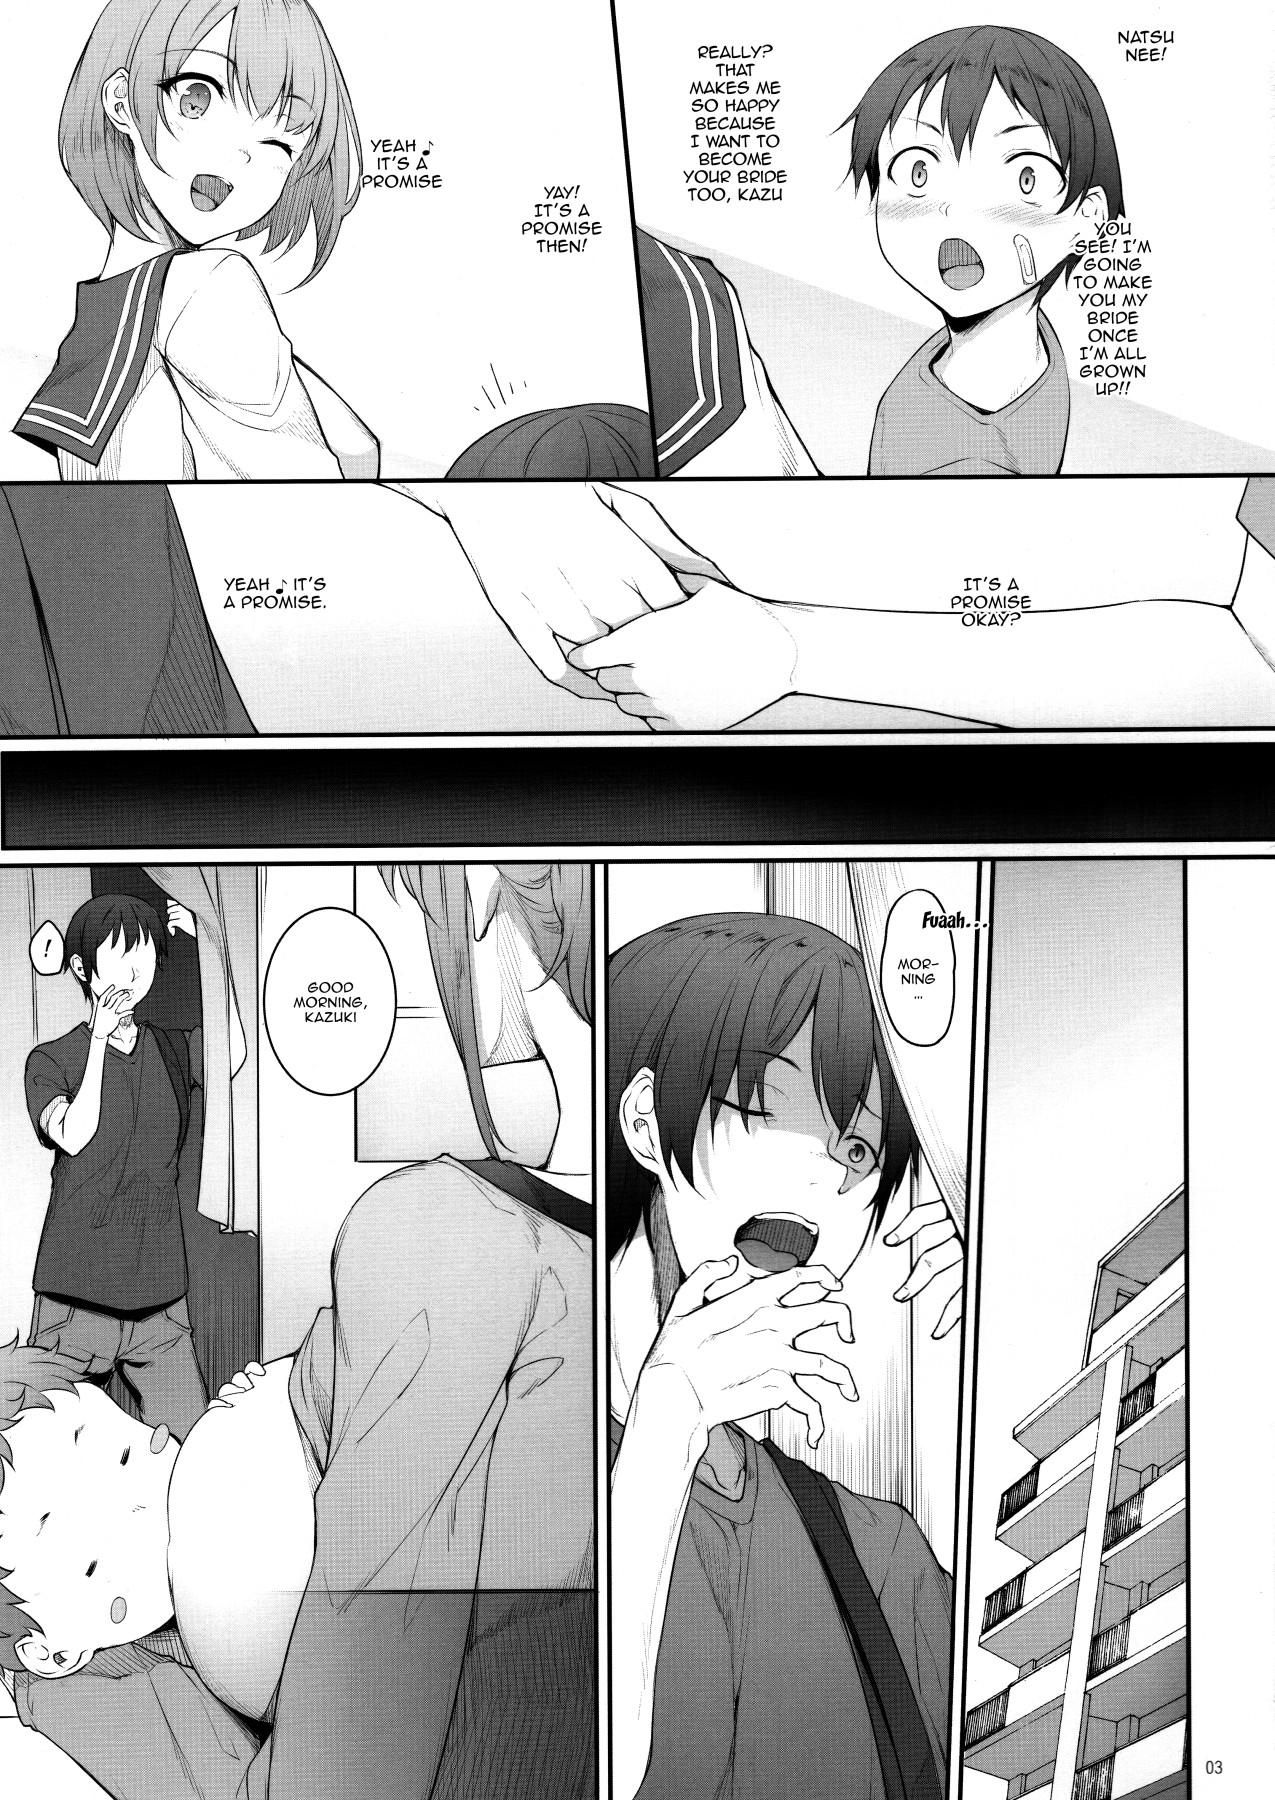 American Ane o Netotta Hi | The Day I Did NTR With My Older Sister - Original Gay Pov - Page 2